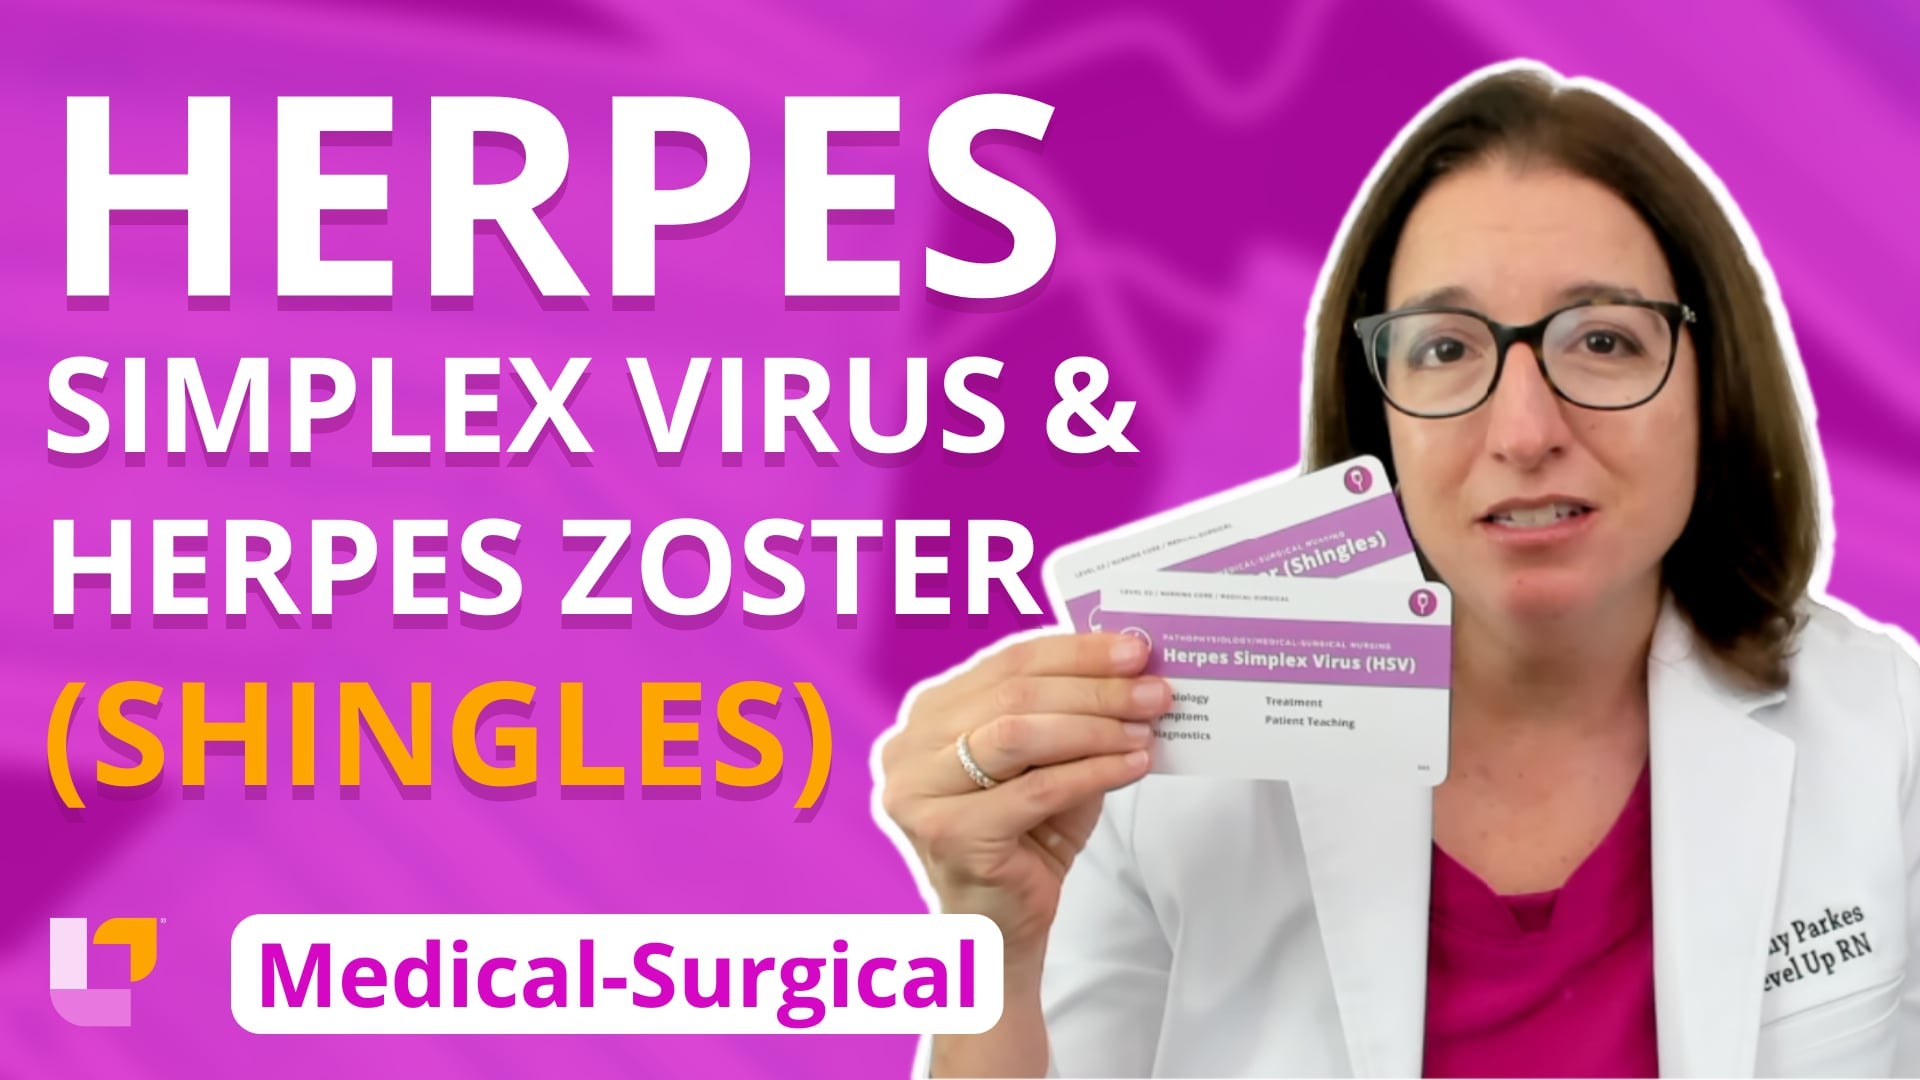 Med-Surg - Integumentary System, part 5: Herpes Simplex Virus and Herpes Zoster - LevelUpRN